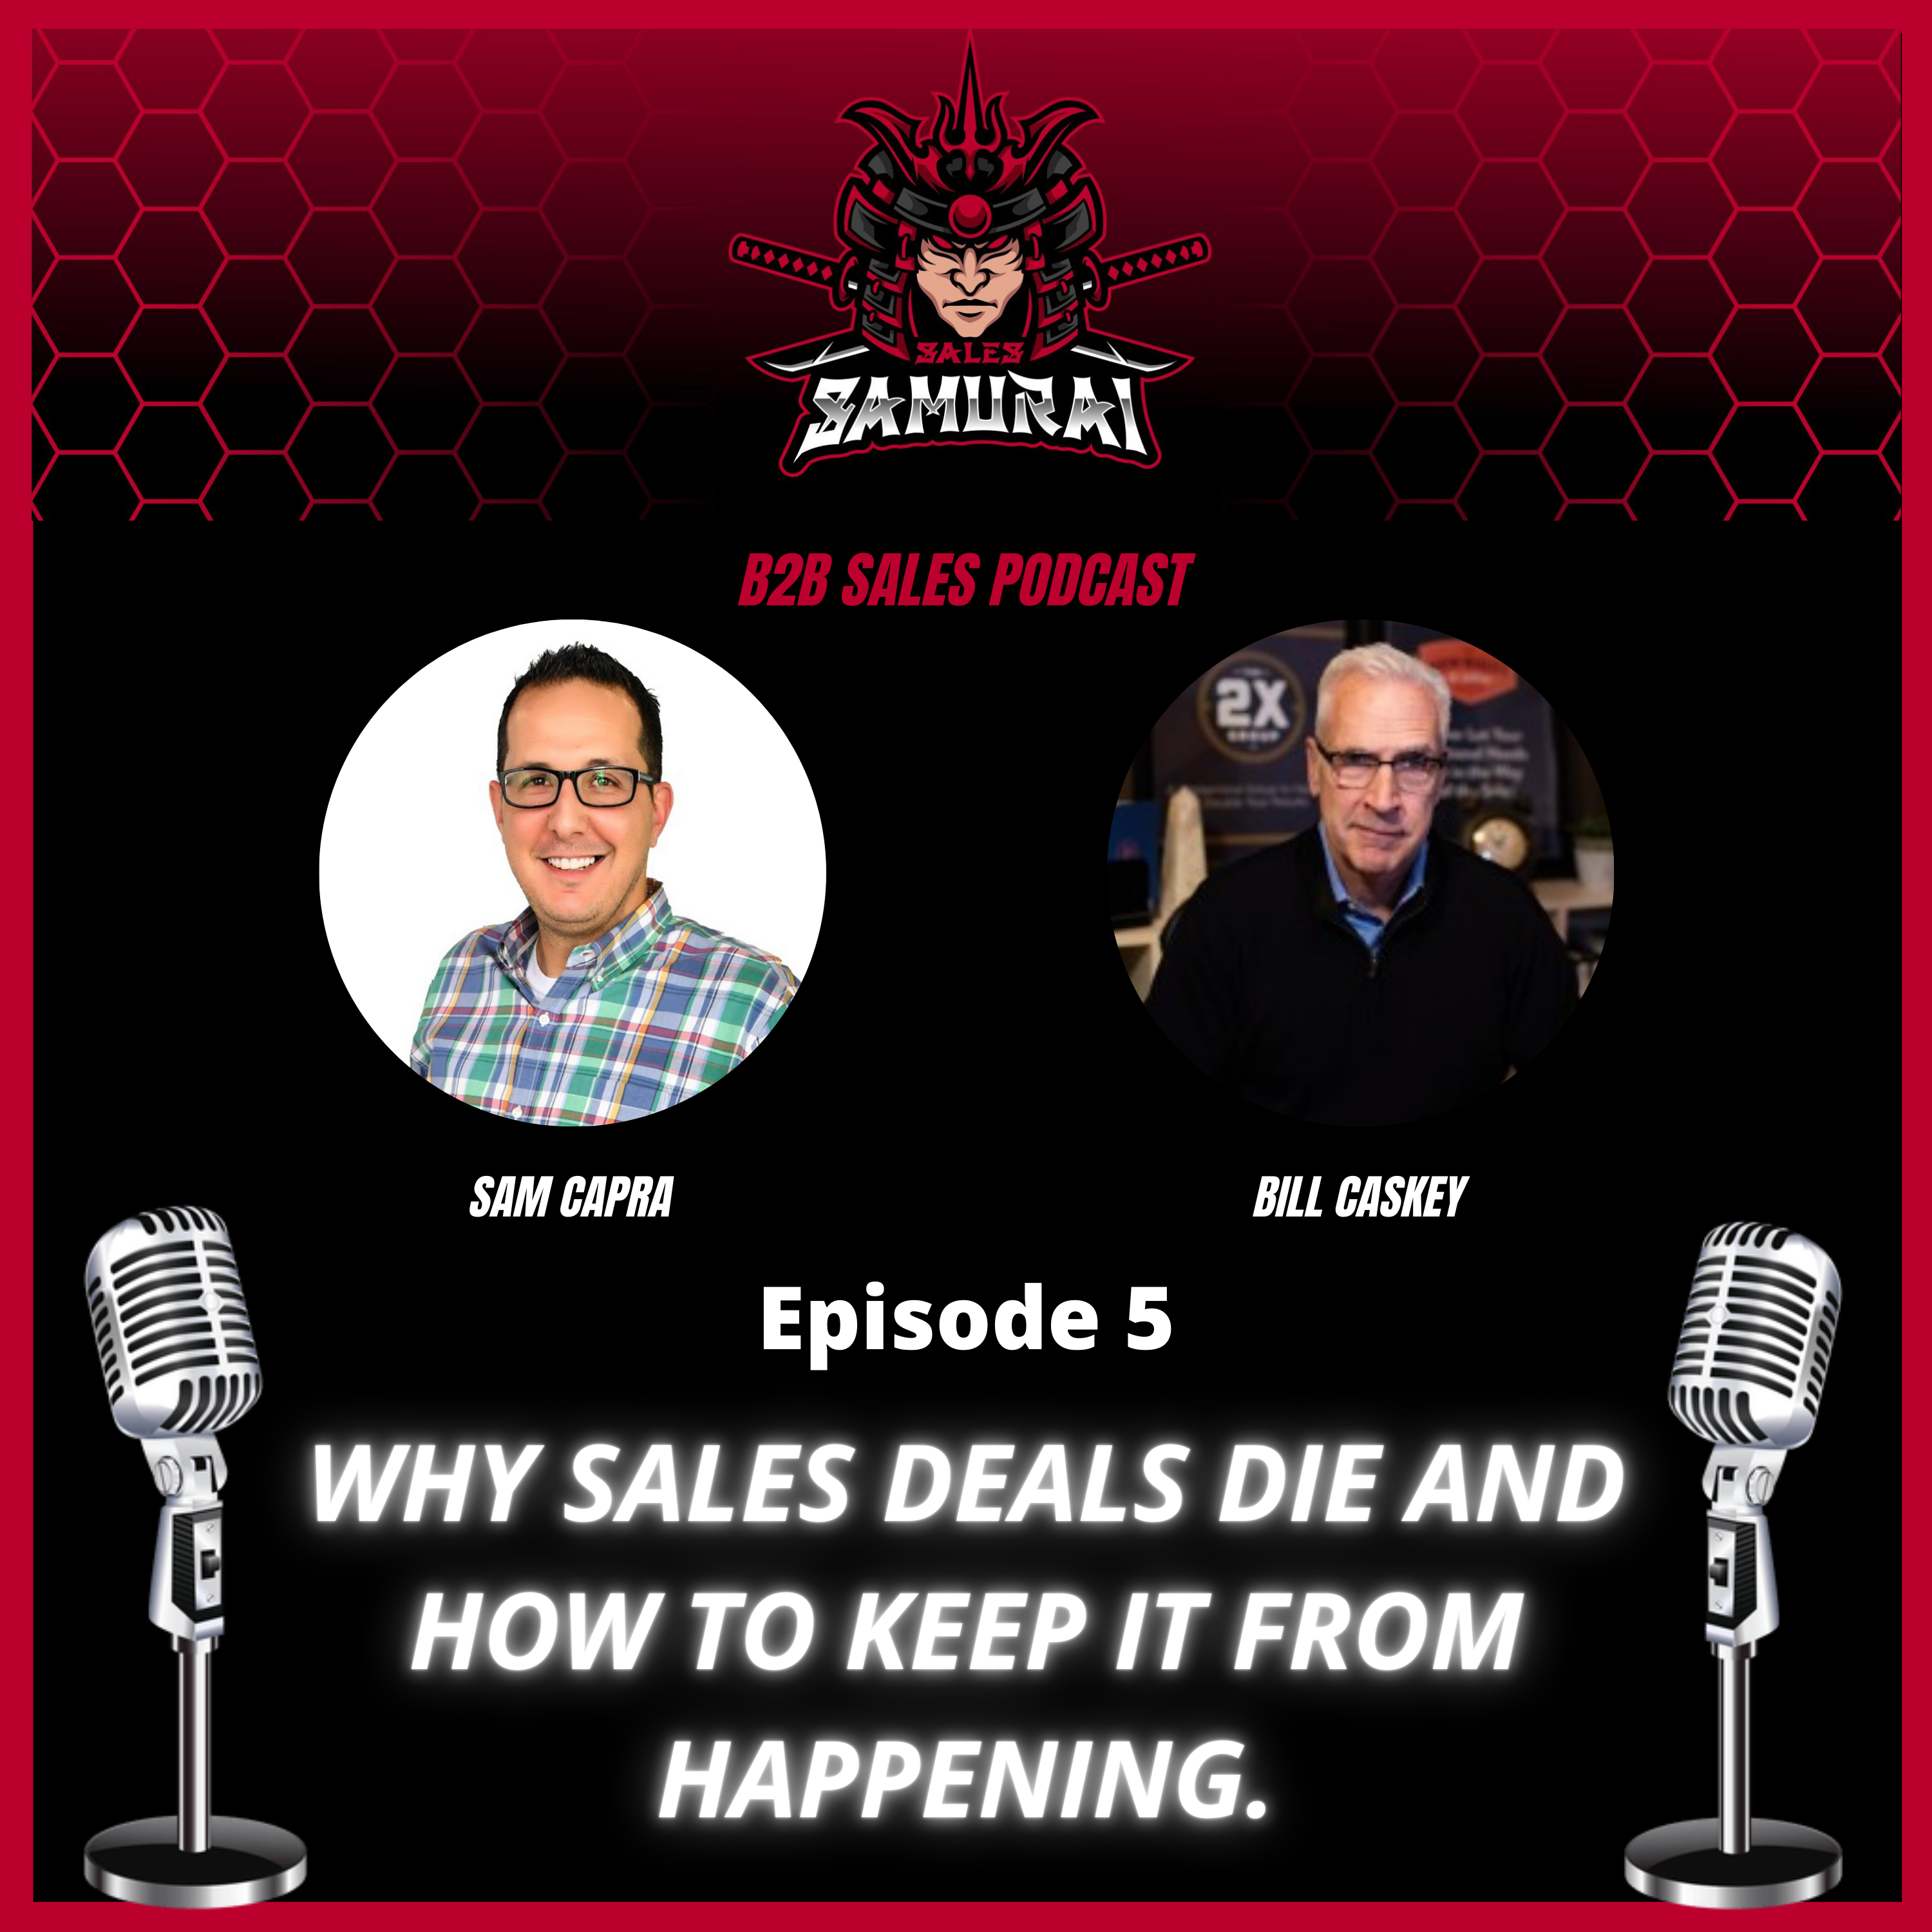 Why Sales Deals Die and How to Keep It From Happening